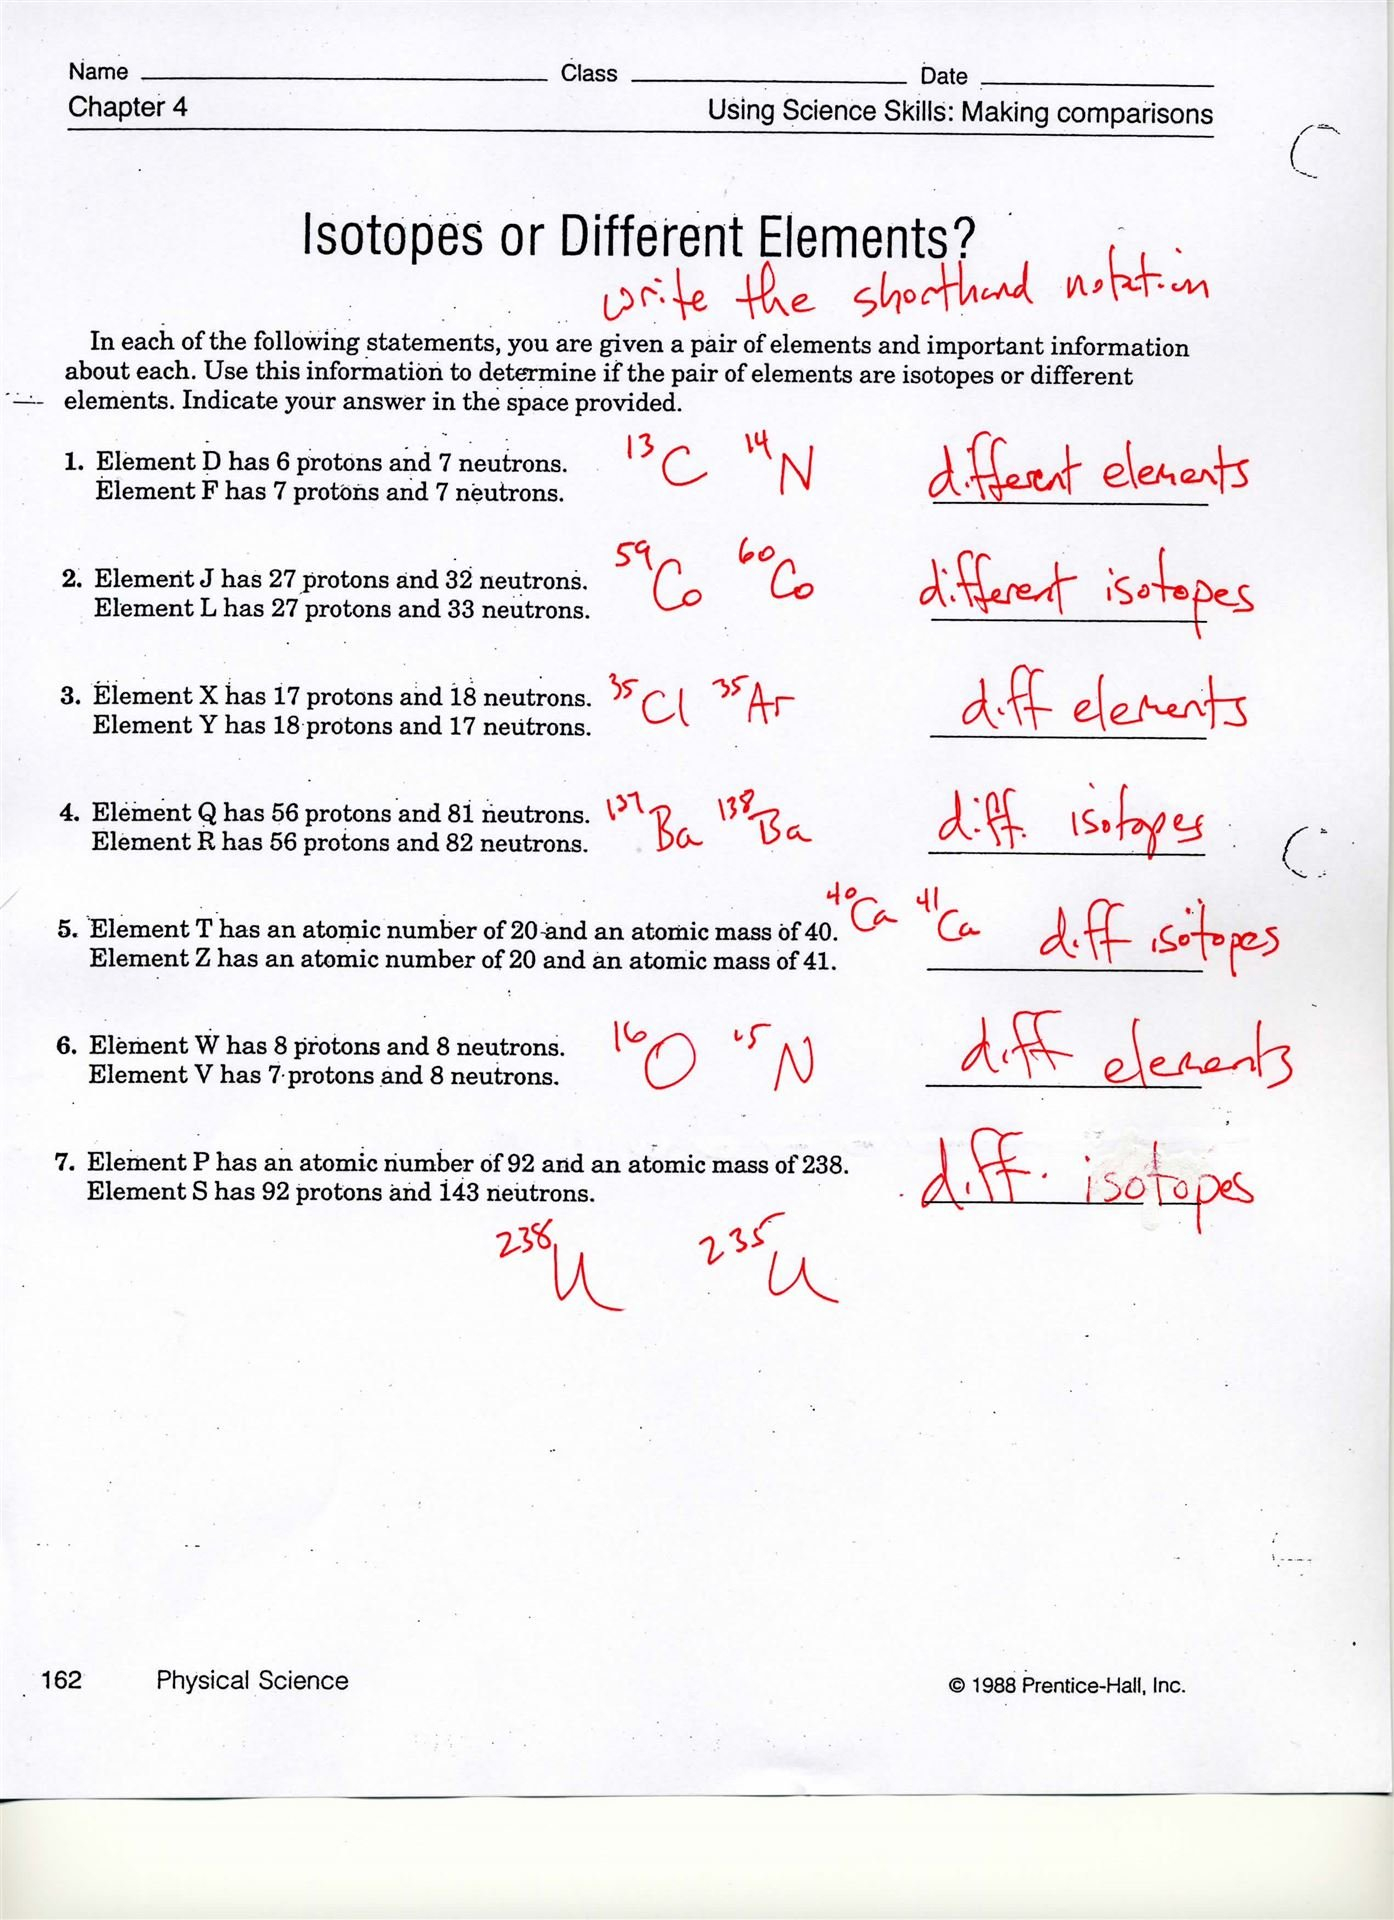 Michael Feeback  Scott County High School Within Isotopes Or Different Elements Chapter 4 Worksheet Answers